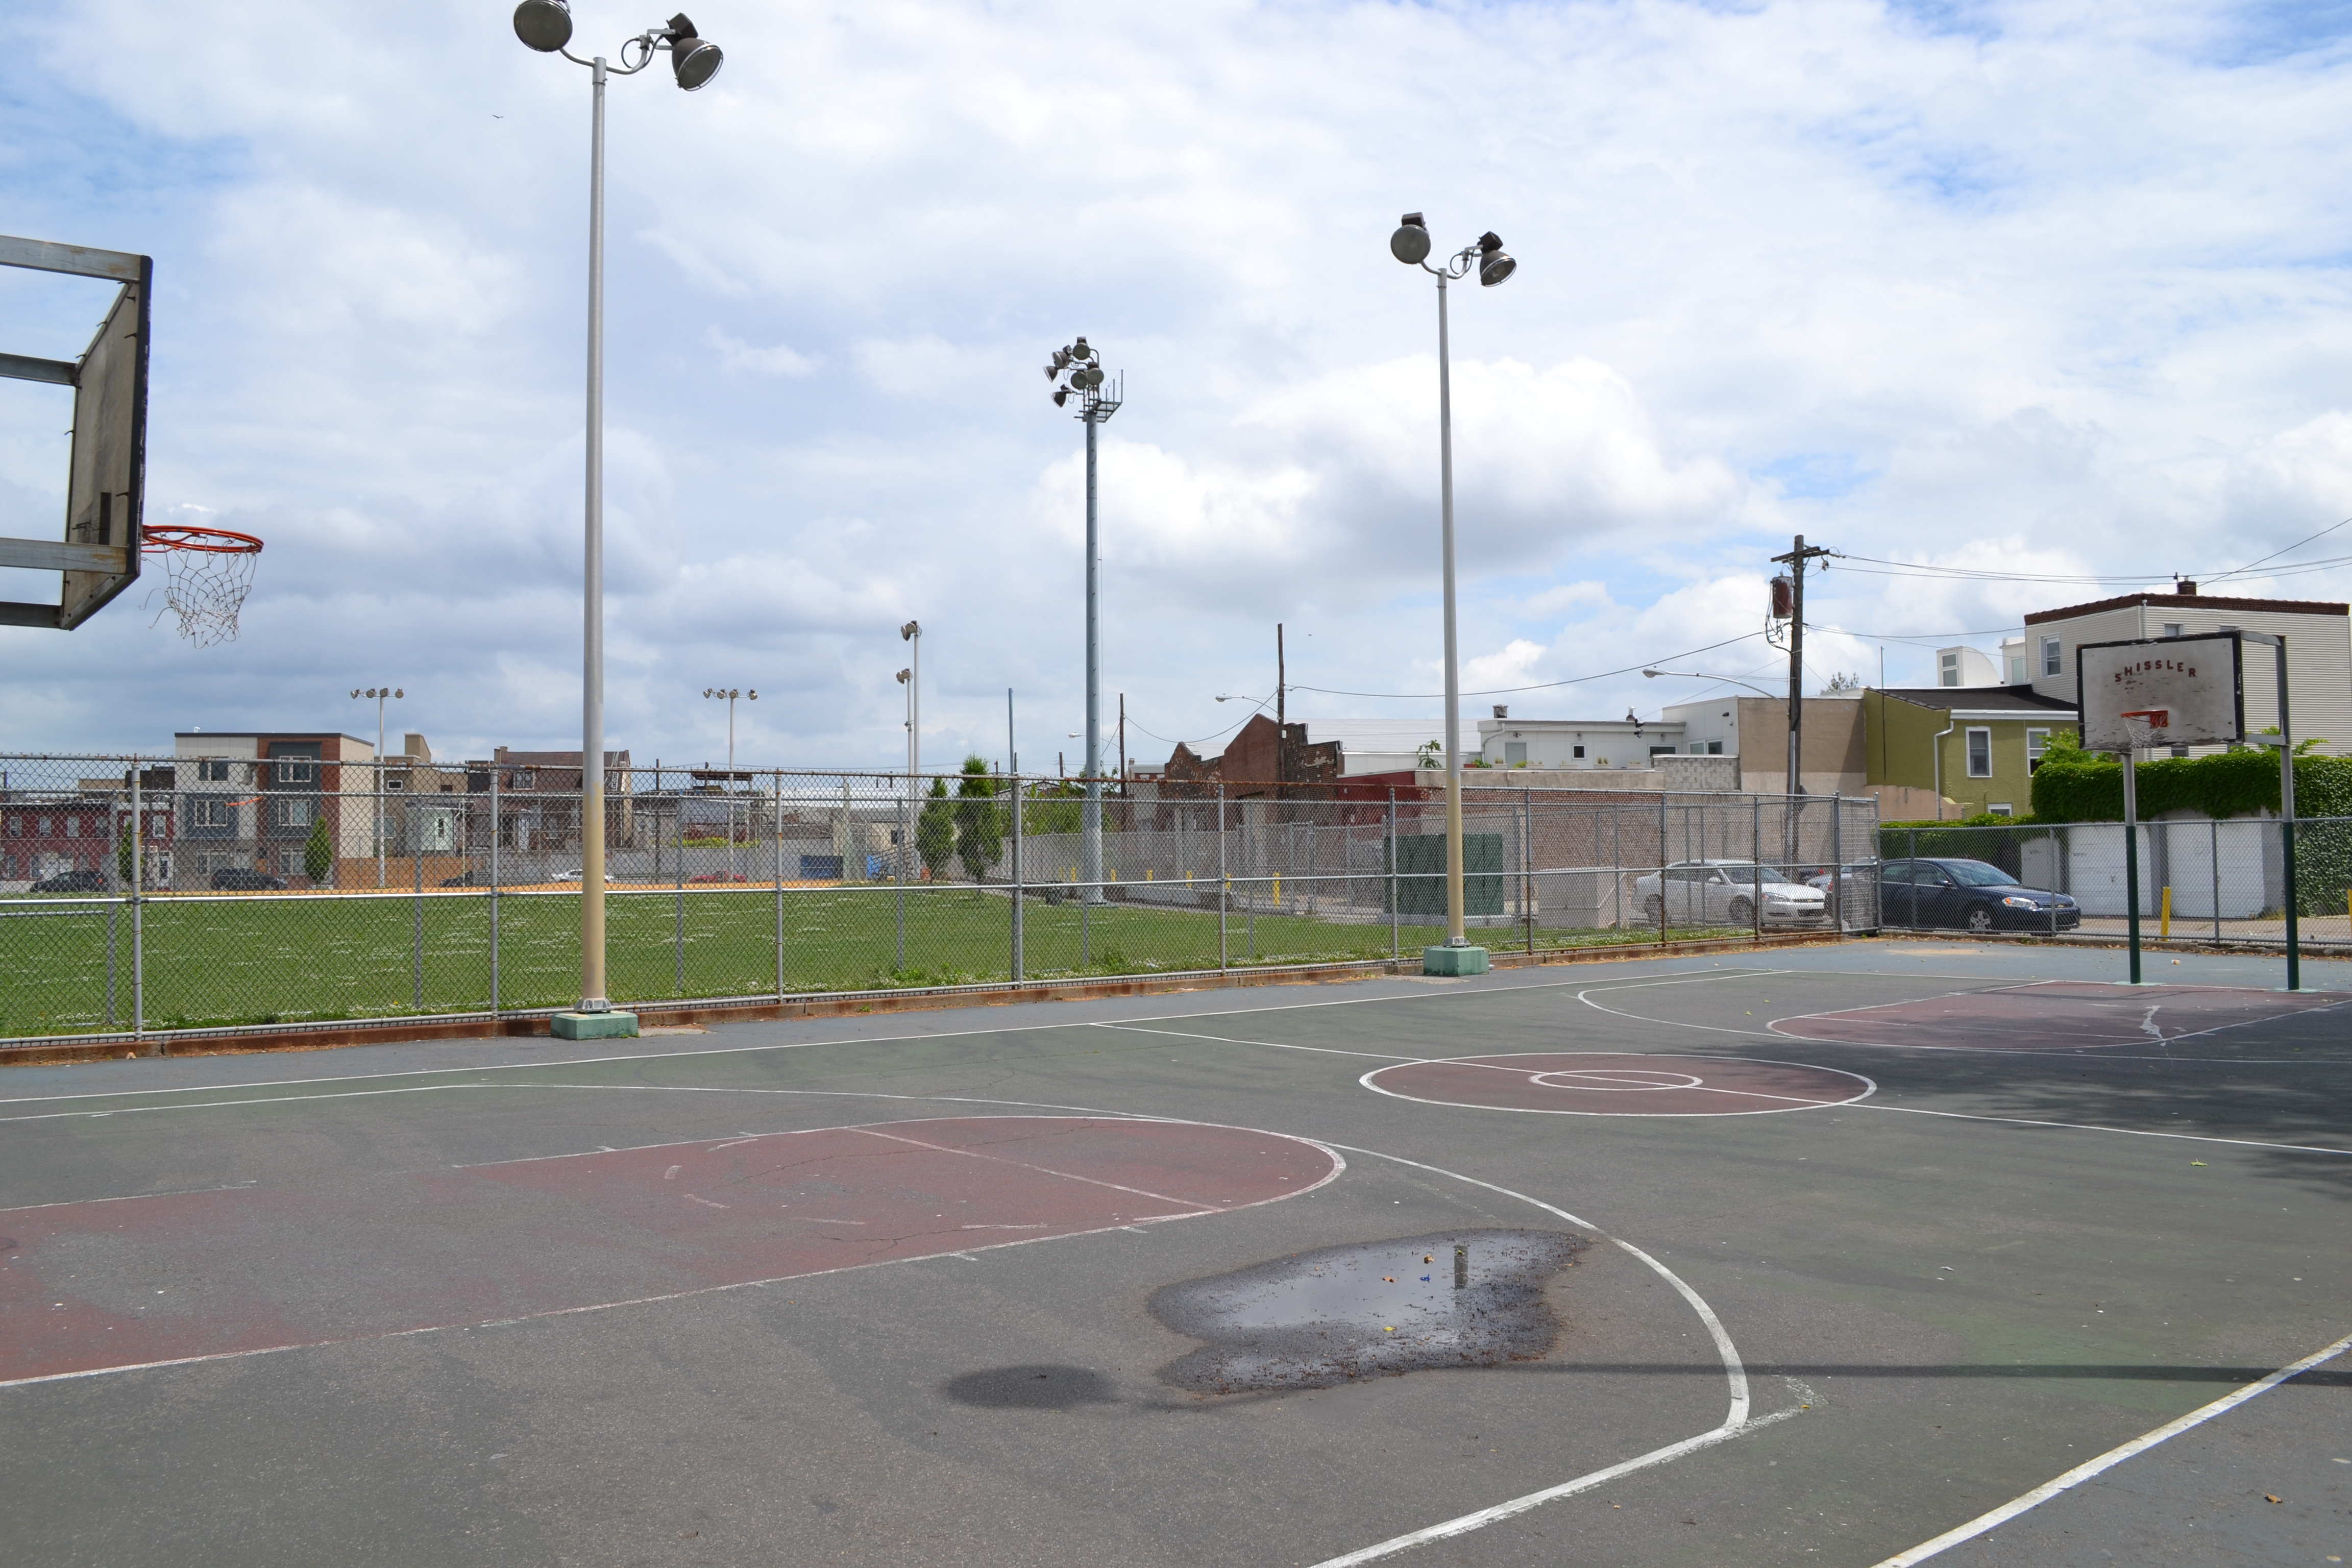 Up next, the Shissler Rec Center basketball court will be repaved and a stormwater management system will be installed beneath the pavement